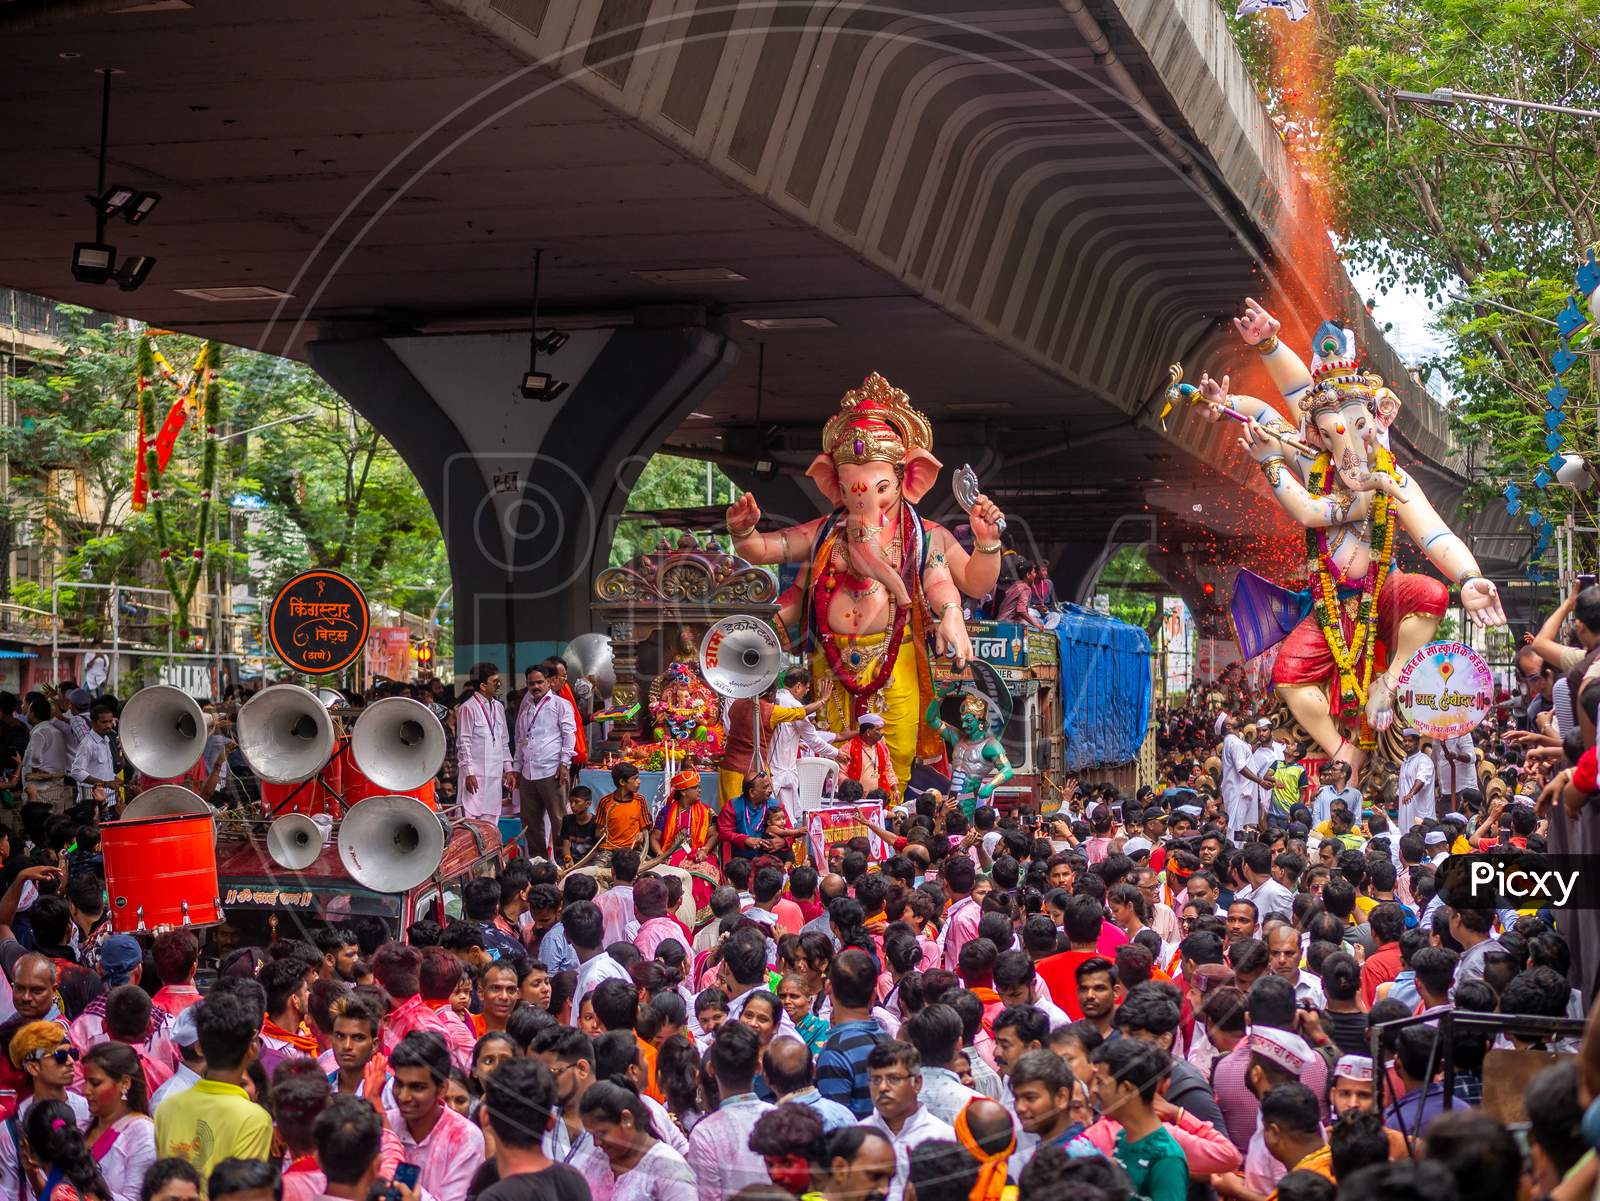 Thousands Of Devotees Bid Adieu To Lord Ganesha In Mumbai During Ganesh Visarjan Which Marks The End Of The Ten-Day-Long Ganesh Chaturthi Festival